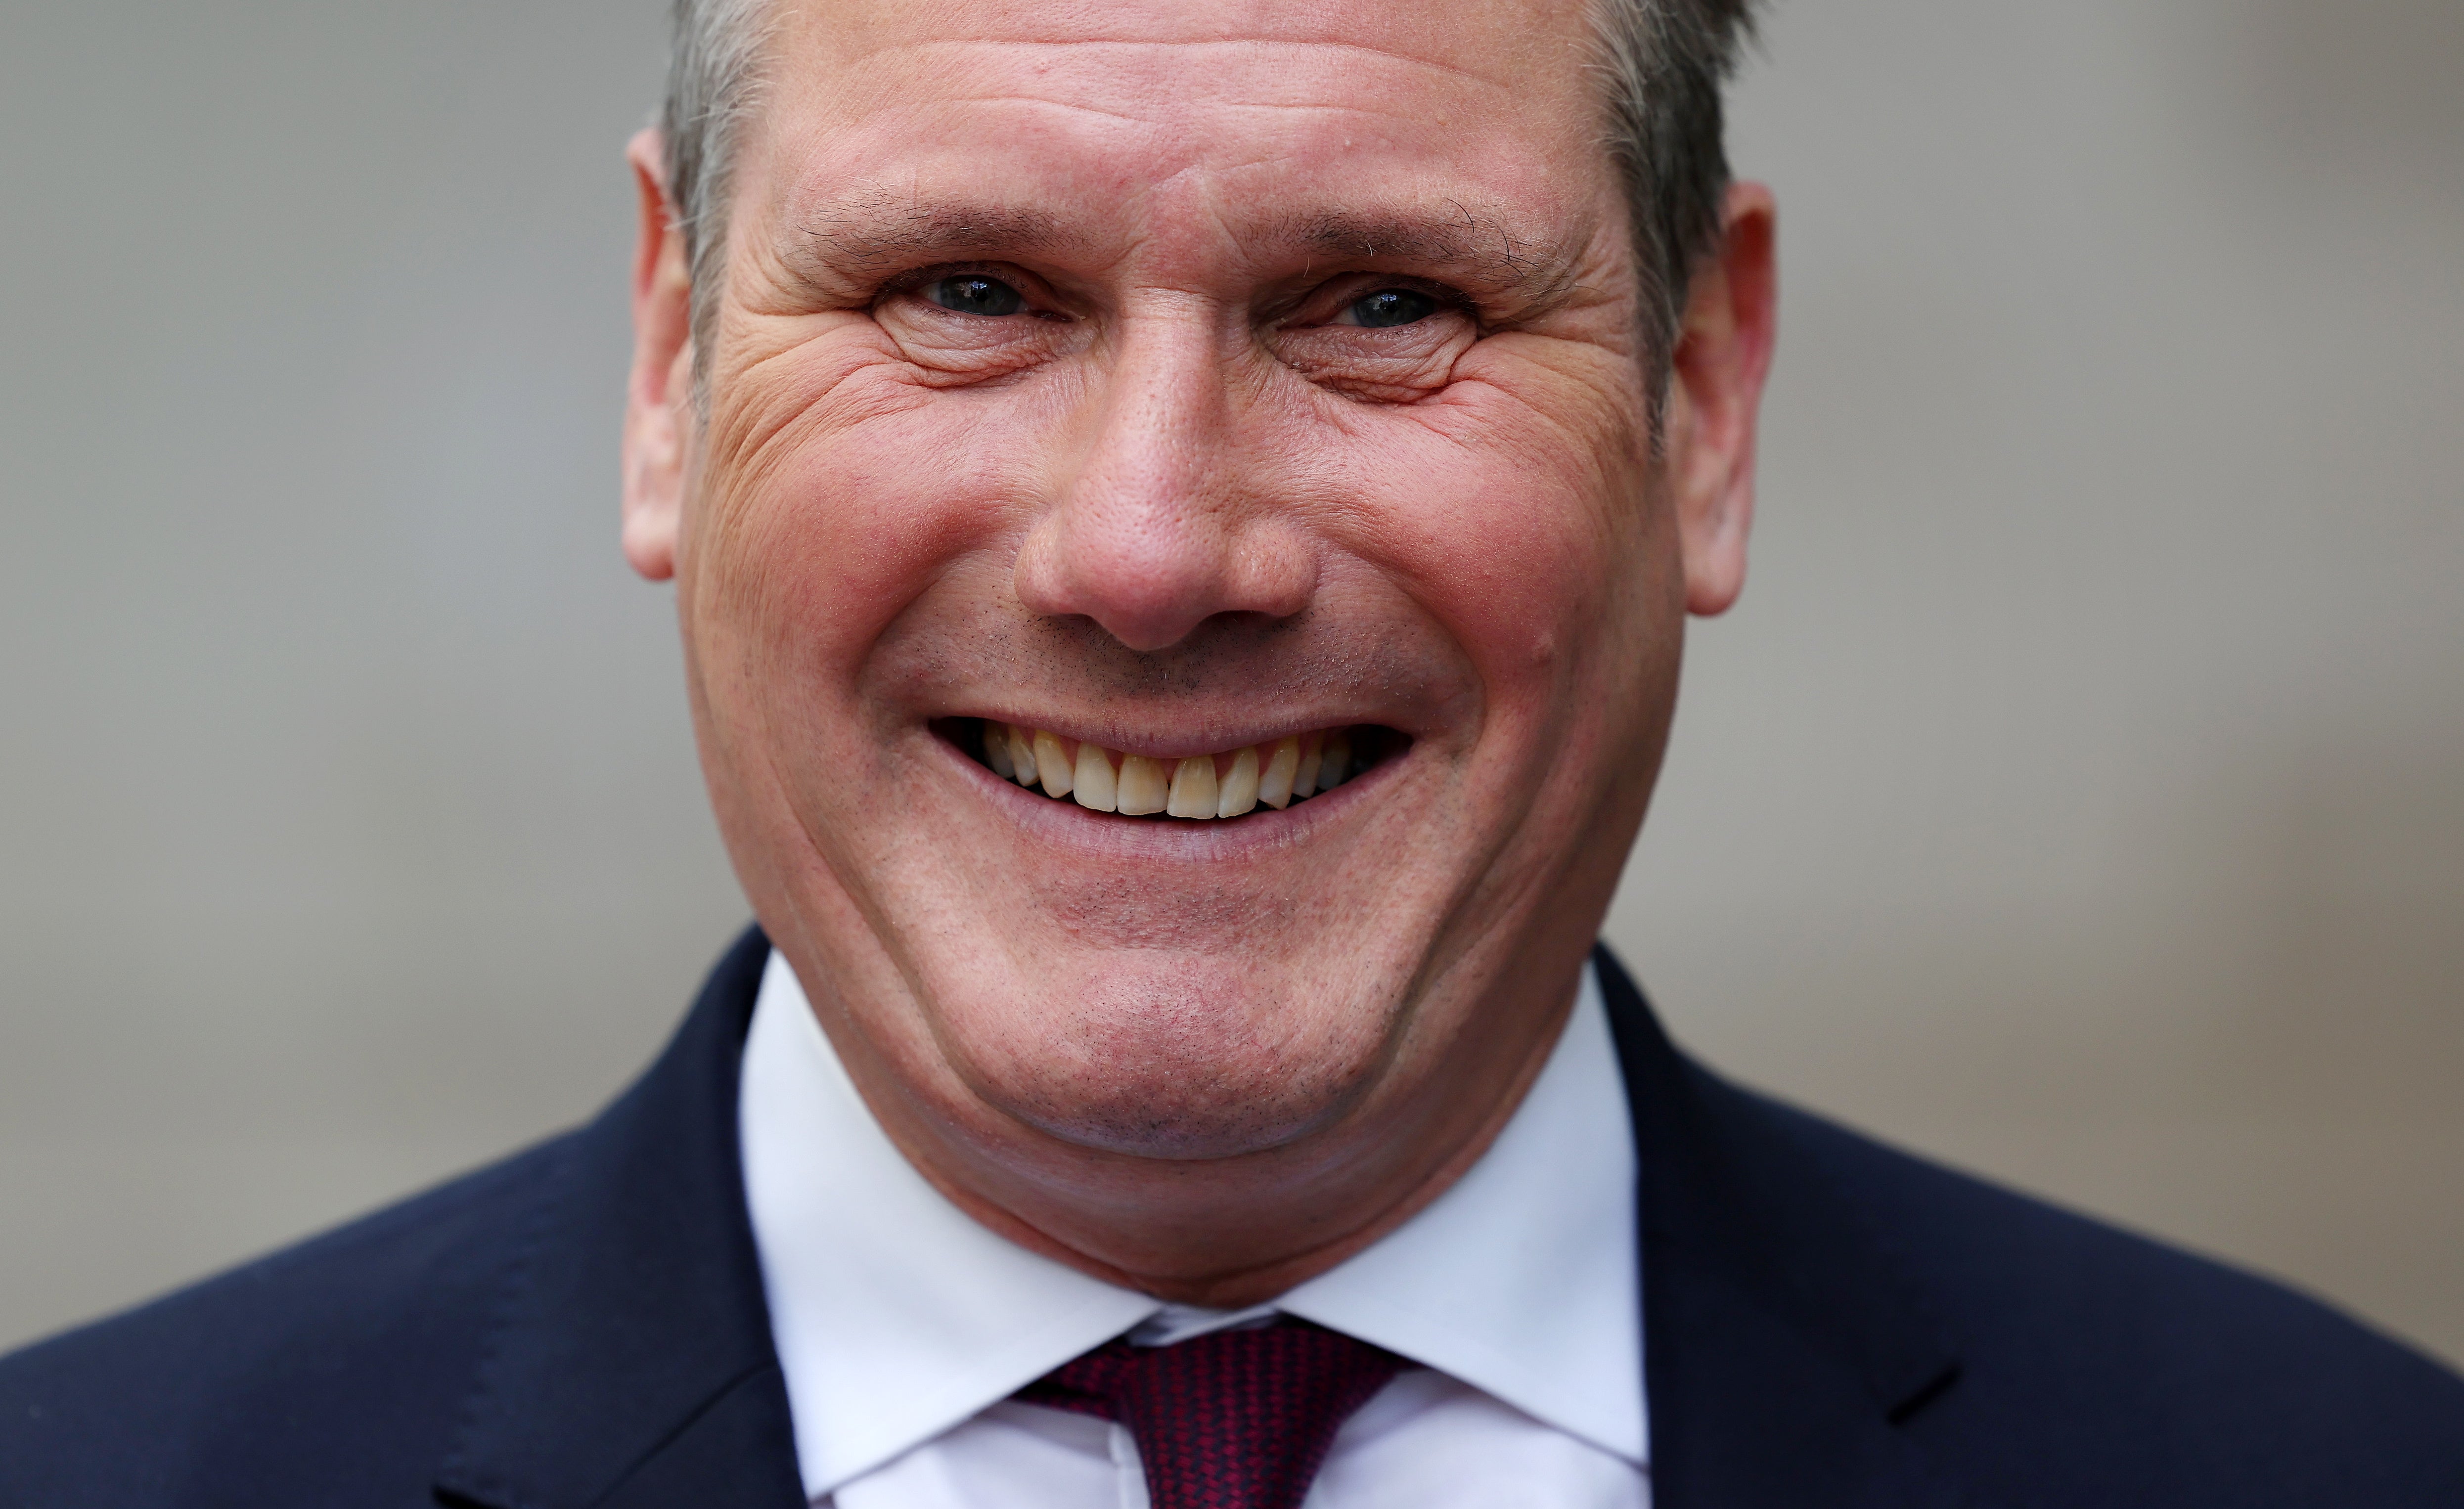 At this point Starmer is practically prime minister in waiting